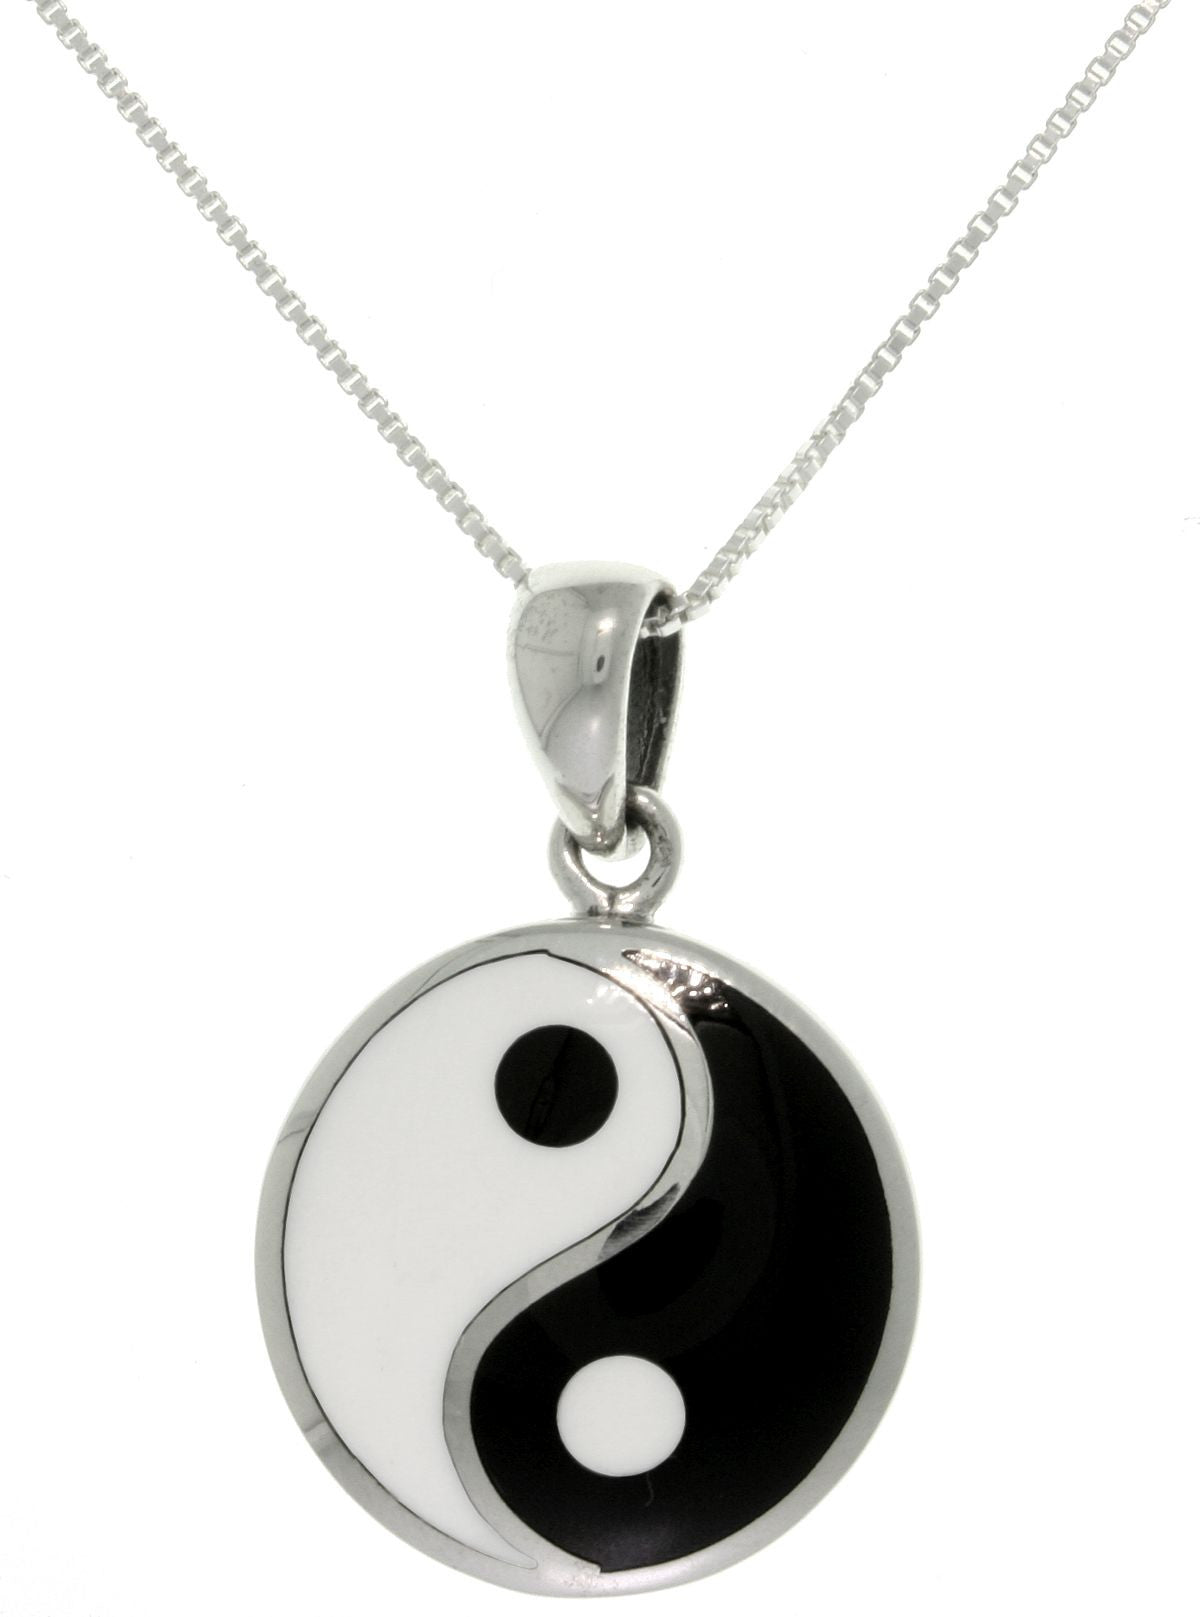 Jewelry Trends Sterling Silver Yin Yang Pendant Black and White Balance Symbol on 18 Inch Chain Necklace